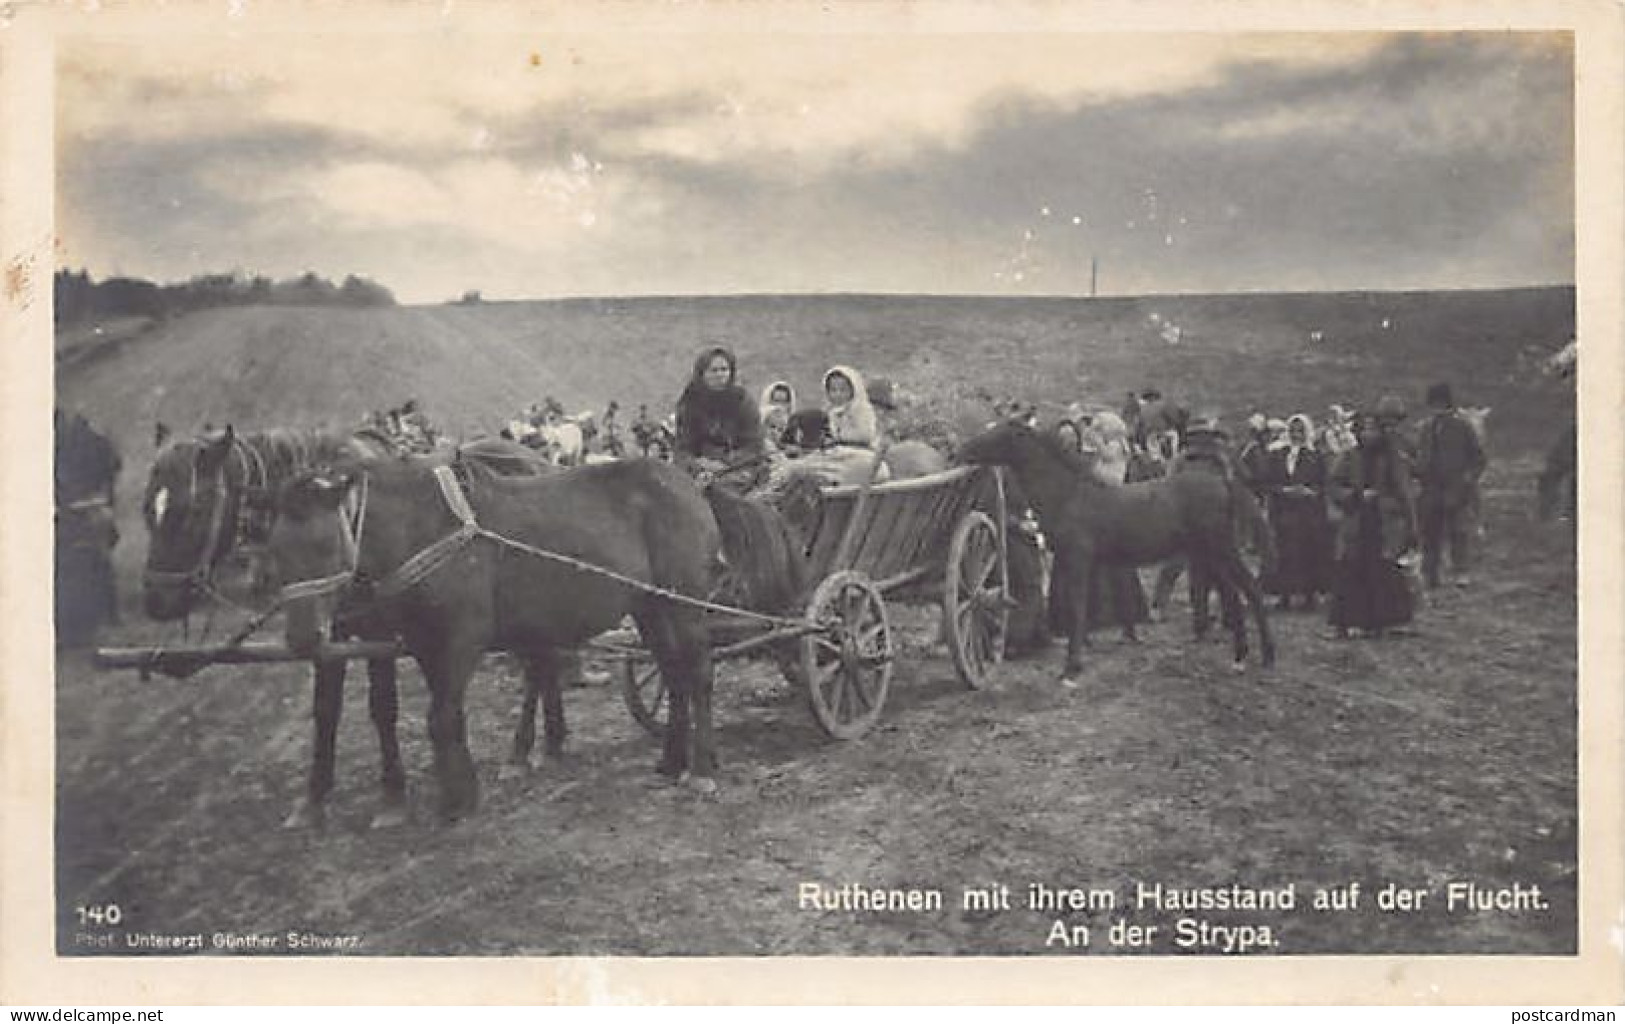 Ukraine - On The Strypa - Ruthenians Fleeing With Their Household During World War One - Publ. P. Wever  - Ukraine